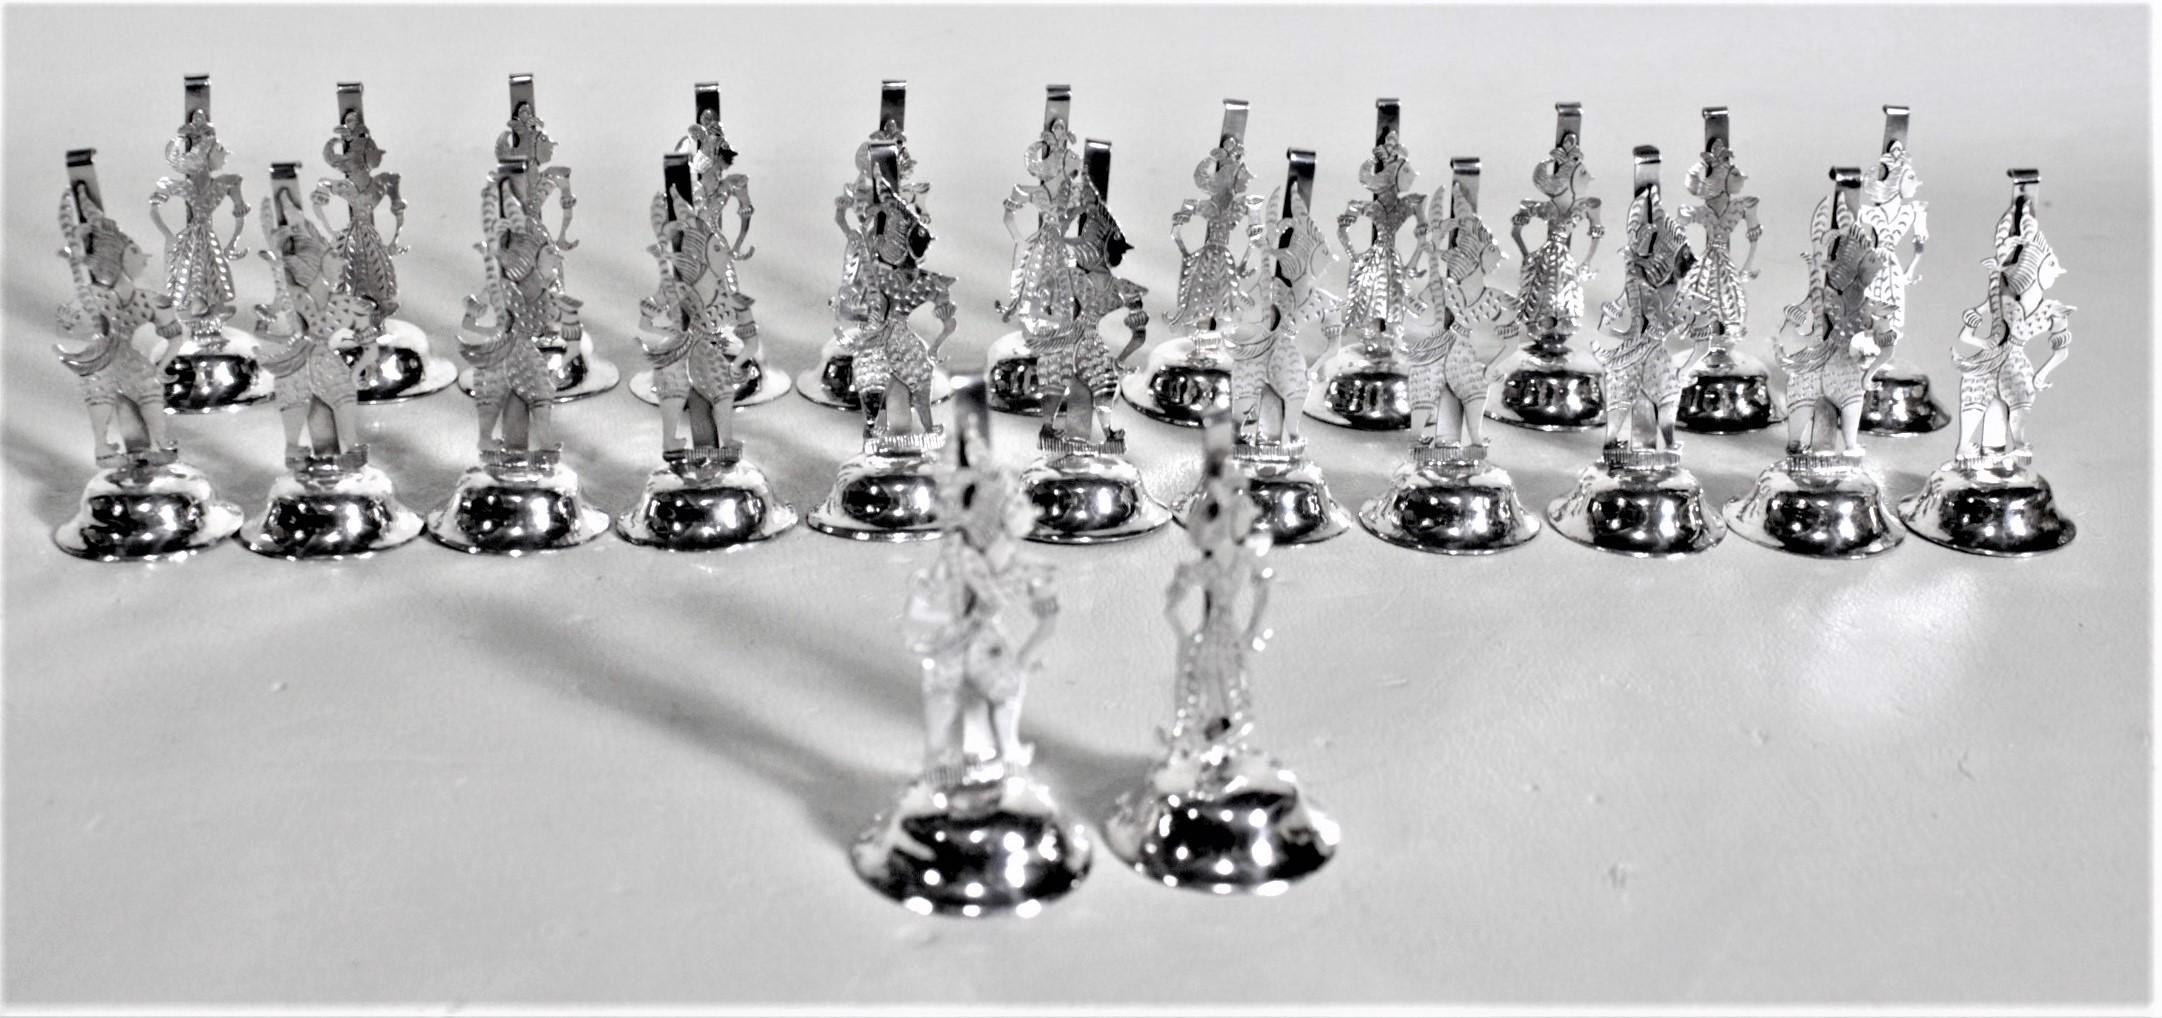 This set of twenty four silver plated place card or menu holders are unsigned, but presumed to have been made in Asia in approximately 1960 in a Tibetan style. The holders are composed of a stamped metal which has been silver plated and heavily